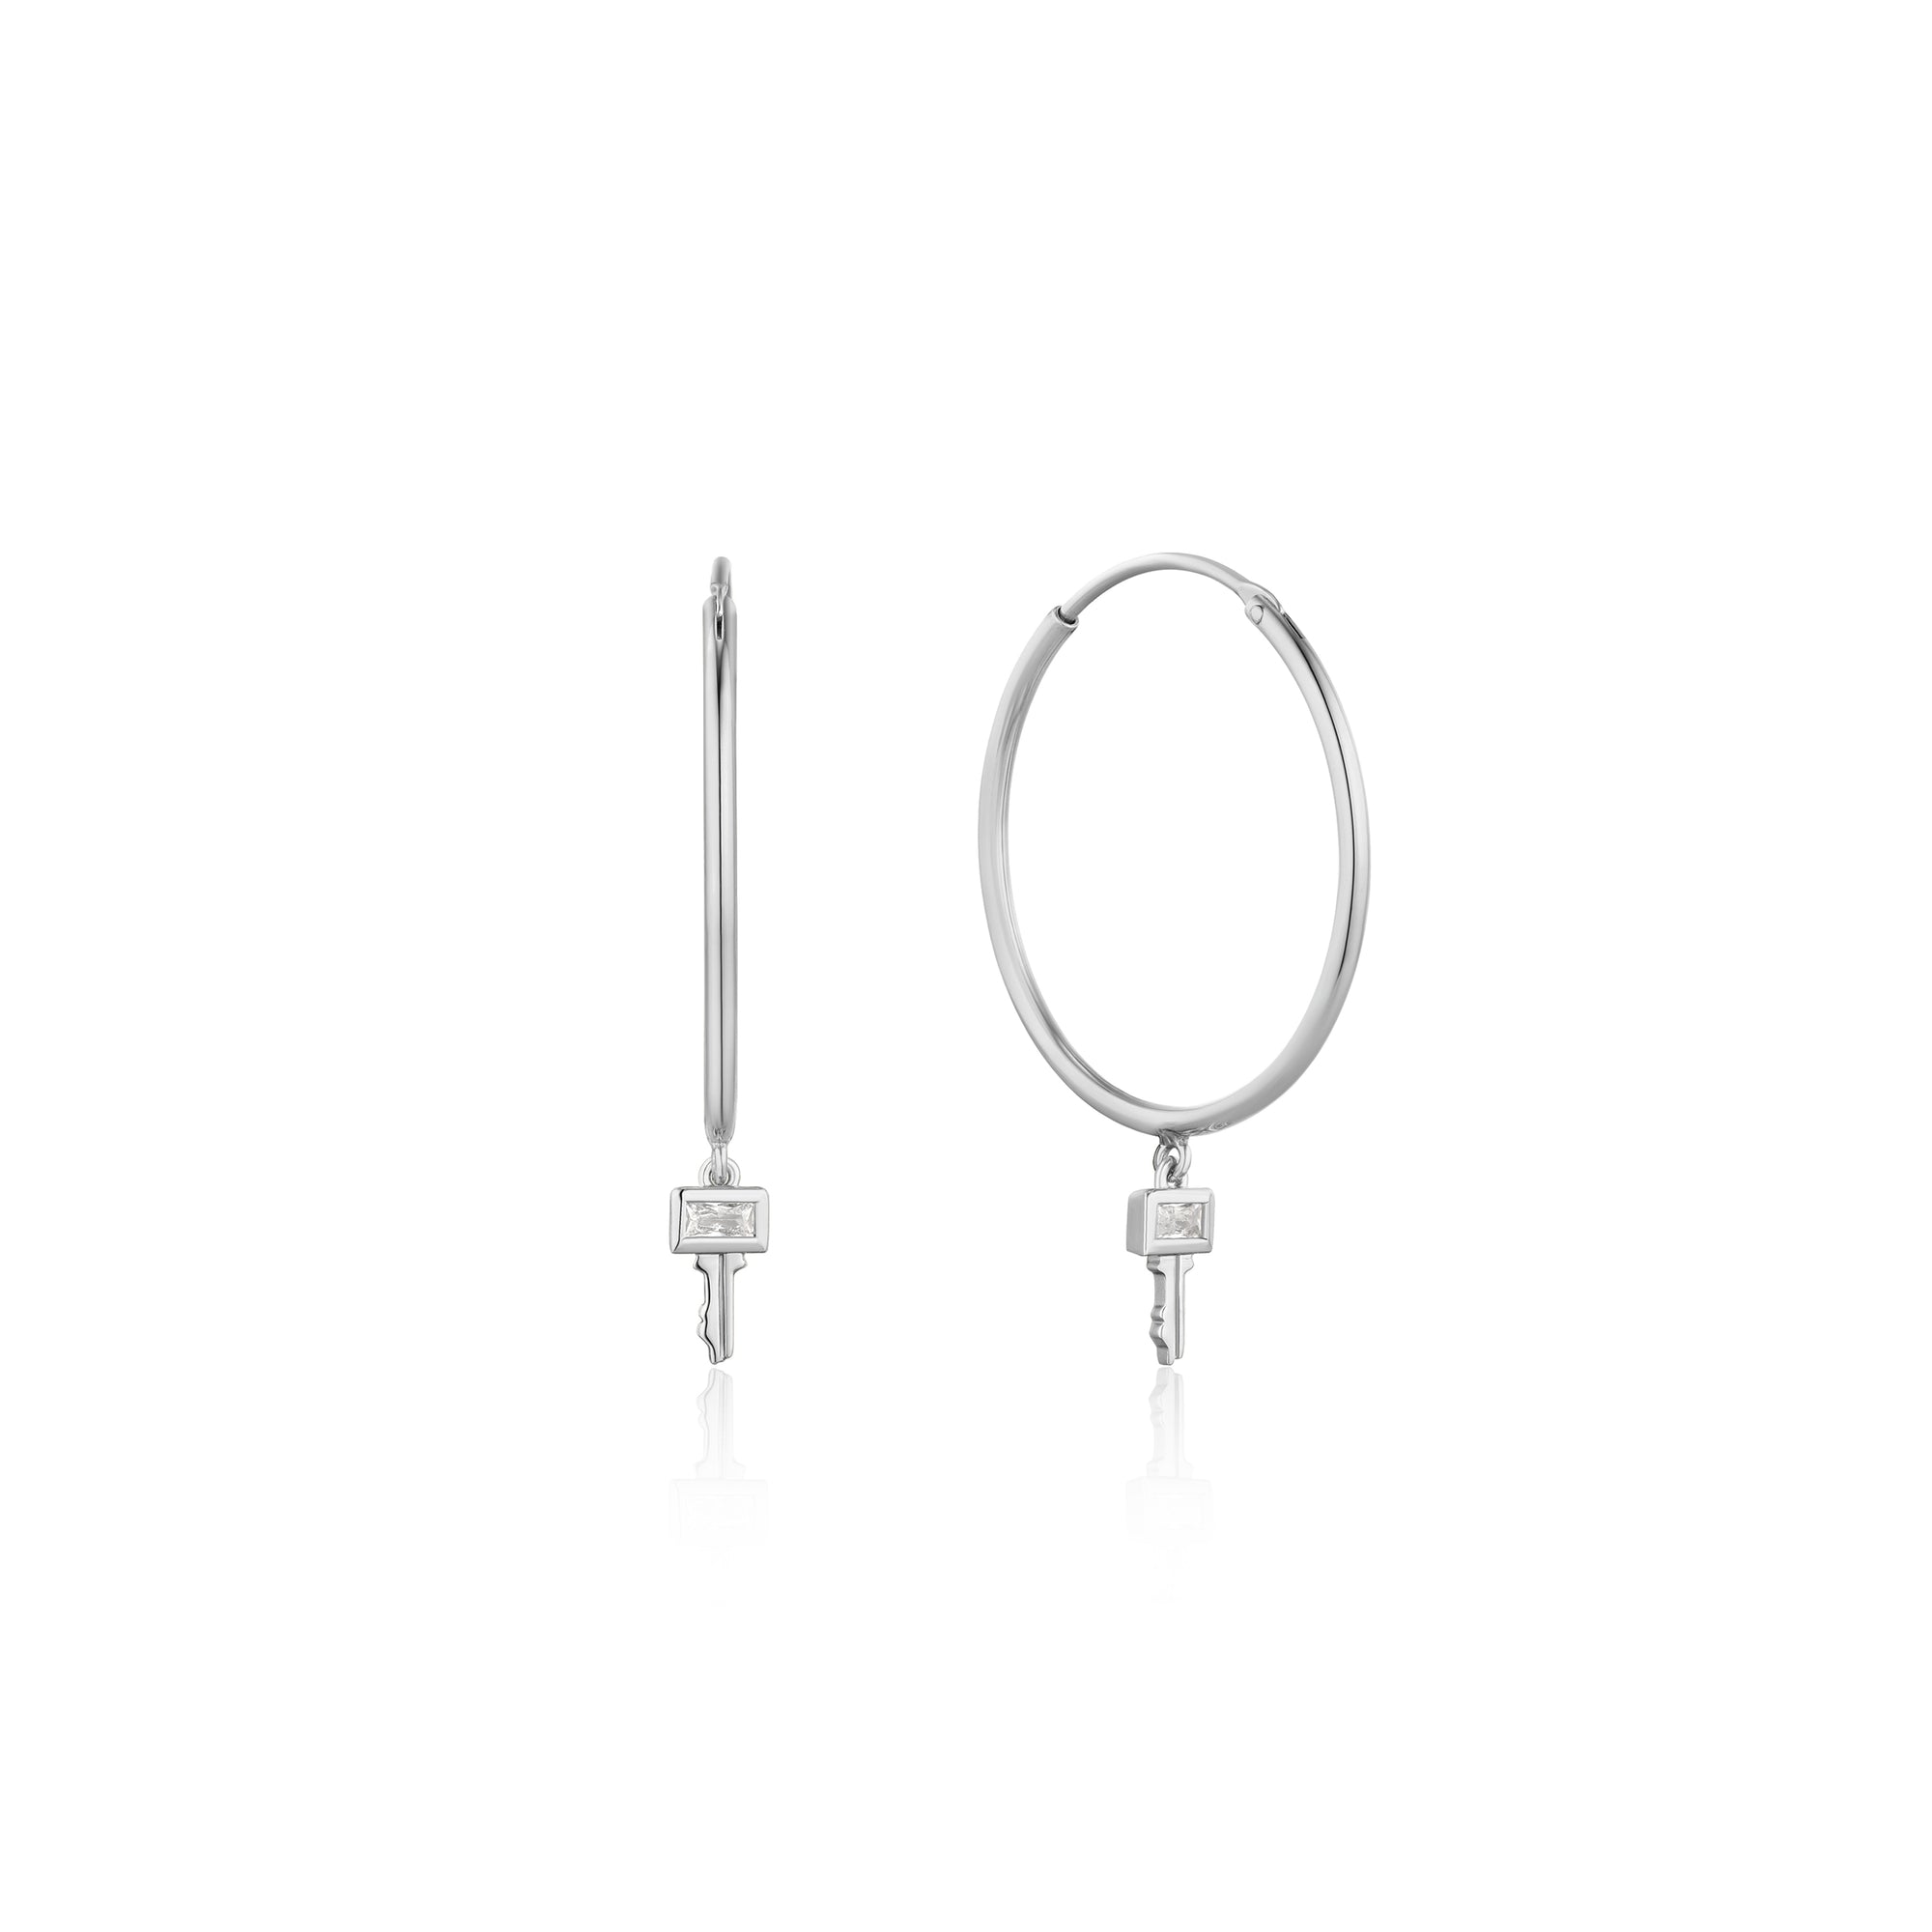 ANIA HAIE ANIA HAIE - Silver Key Hoop Earrings available at The Good Life Boutique